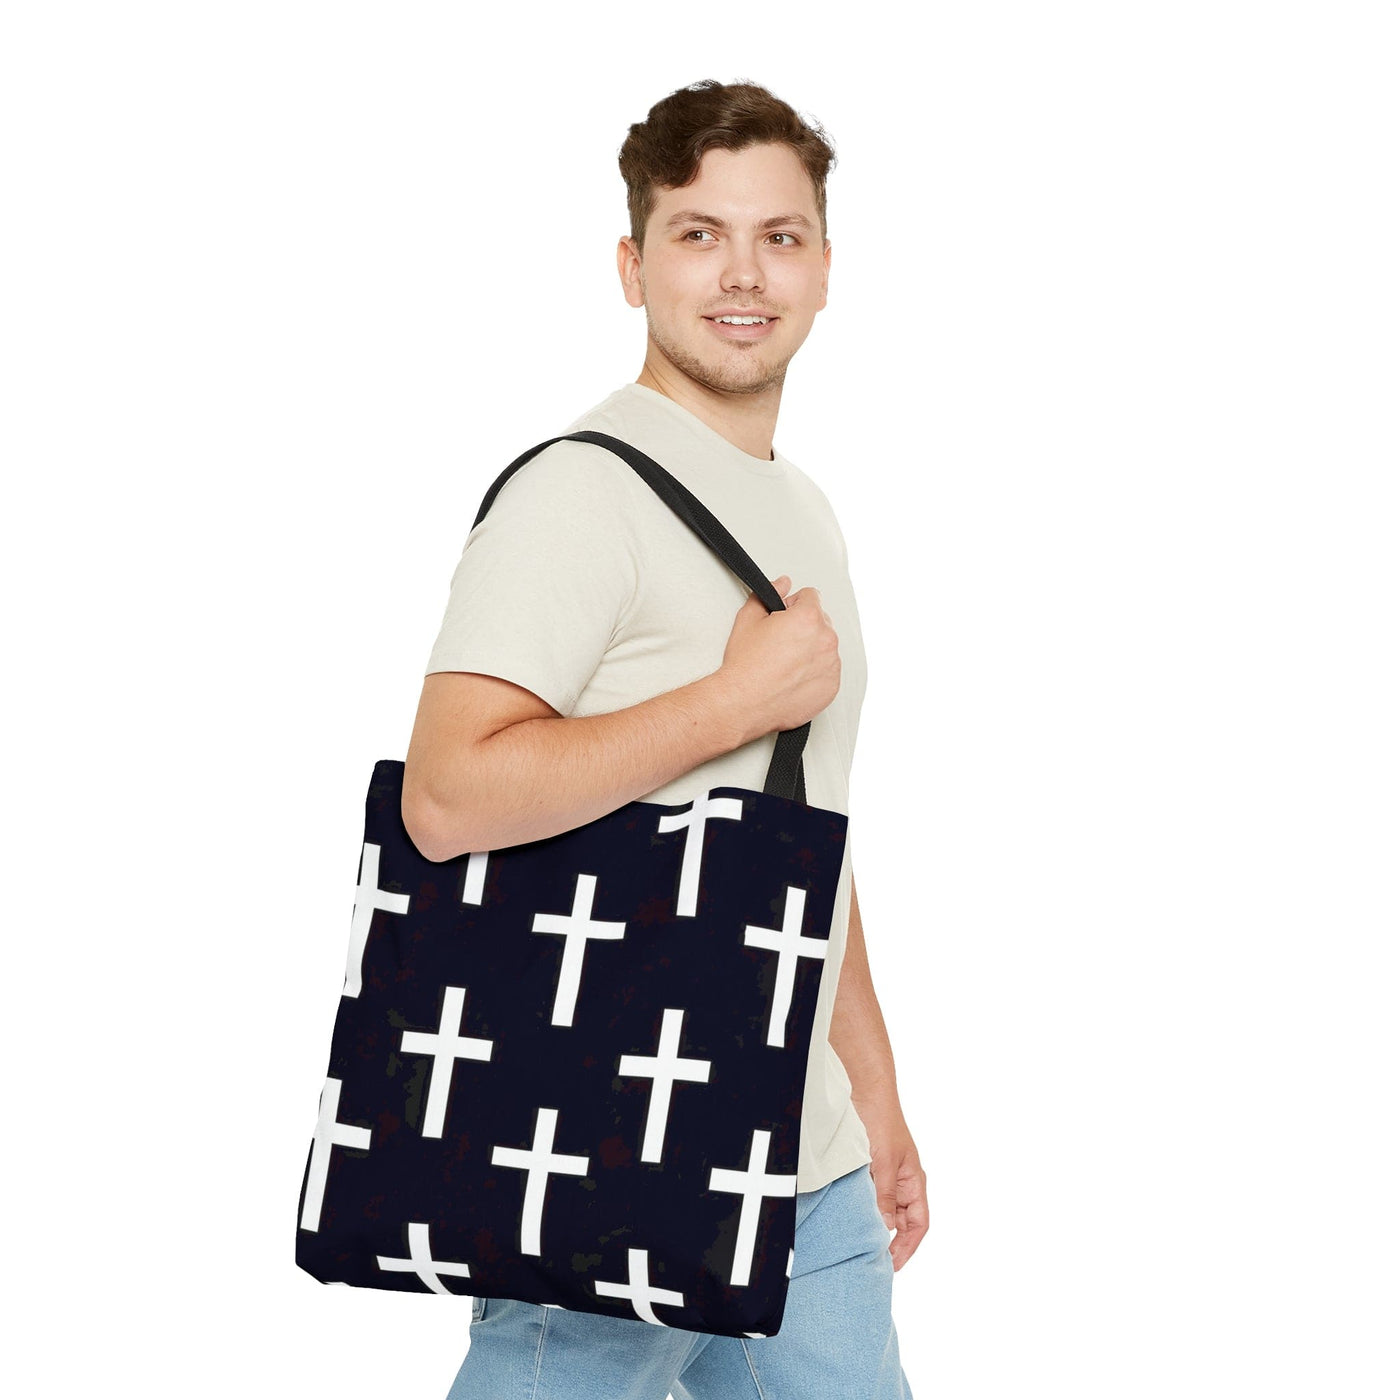 Canvas Tote Bag Black And White Seamless Cross Pattern - Bags | Canvas Tote Bags